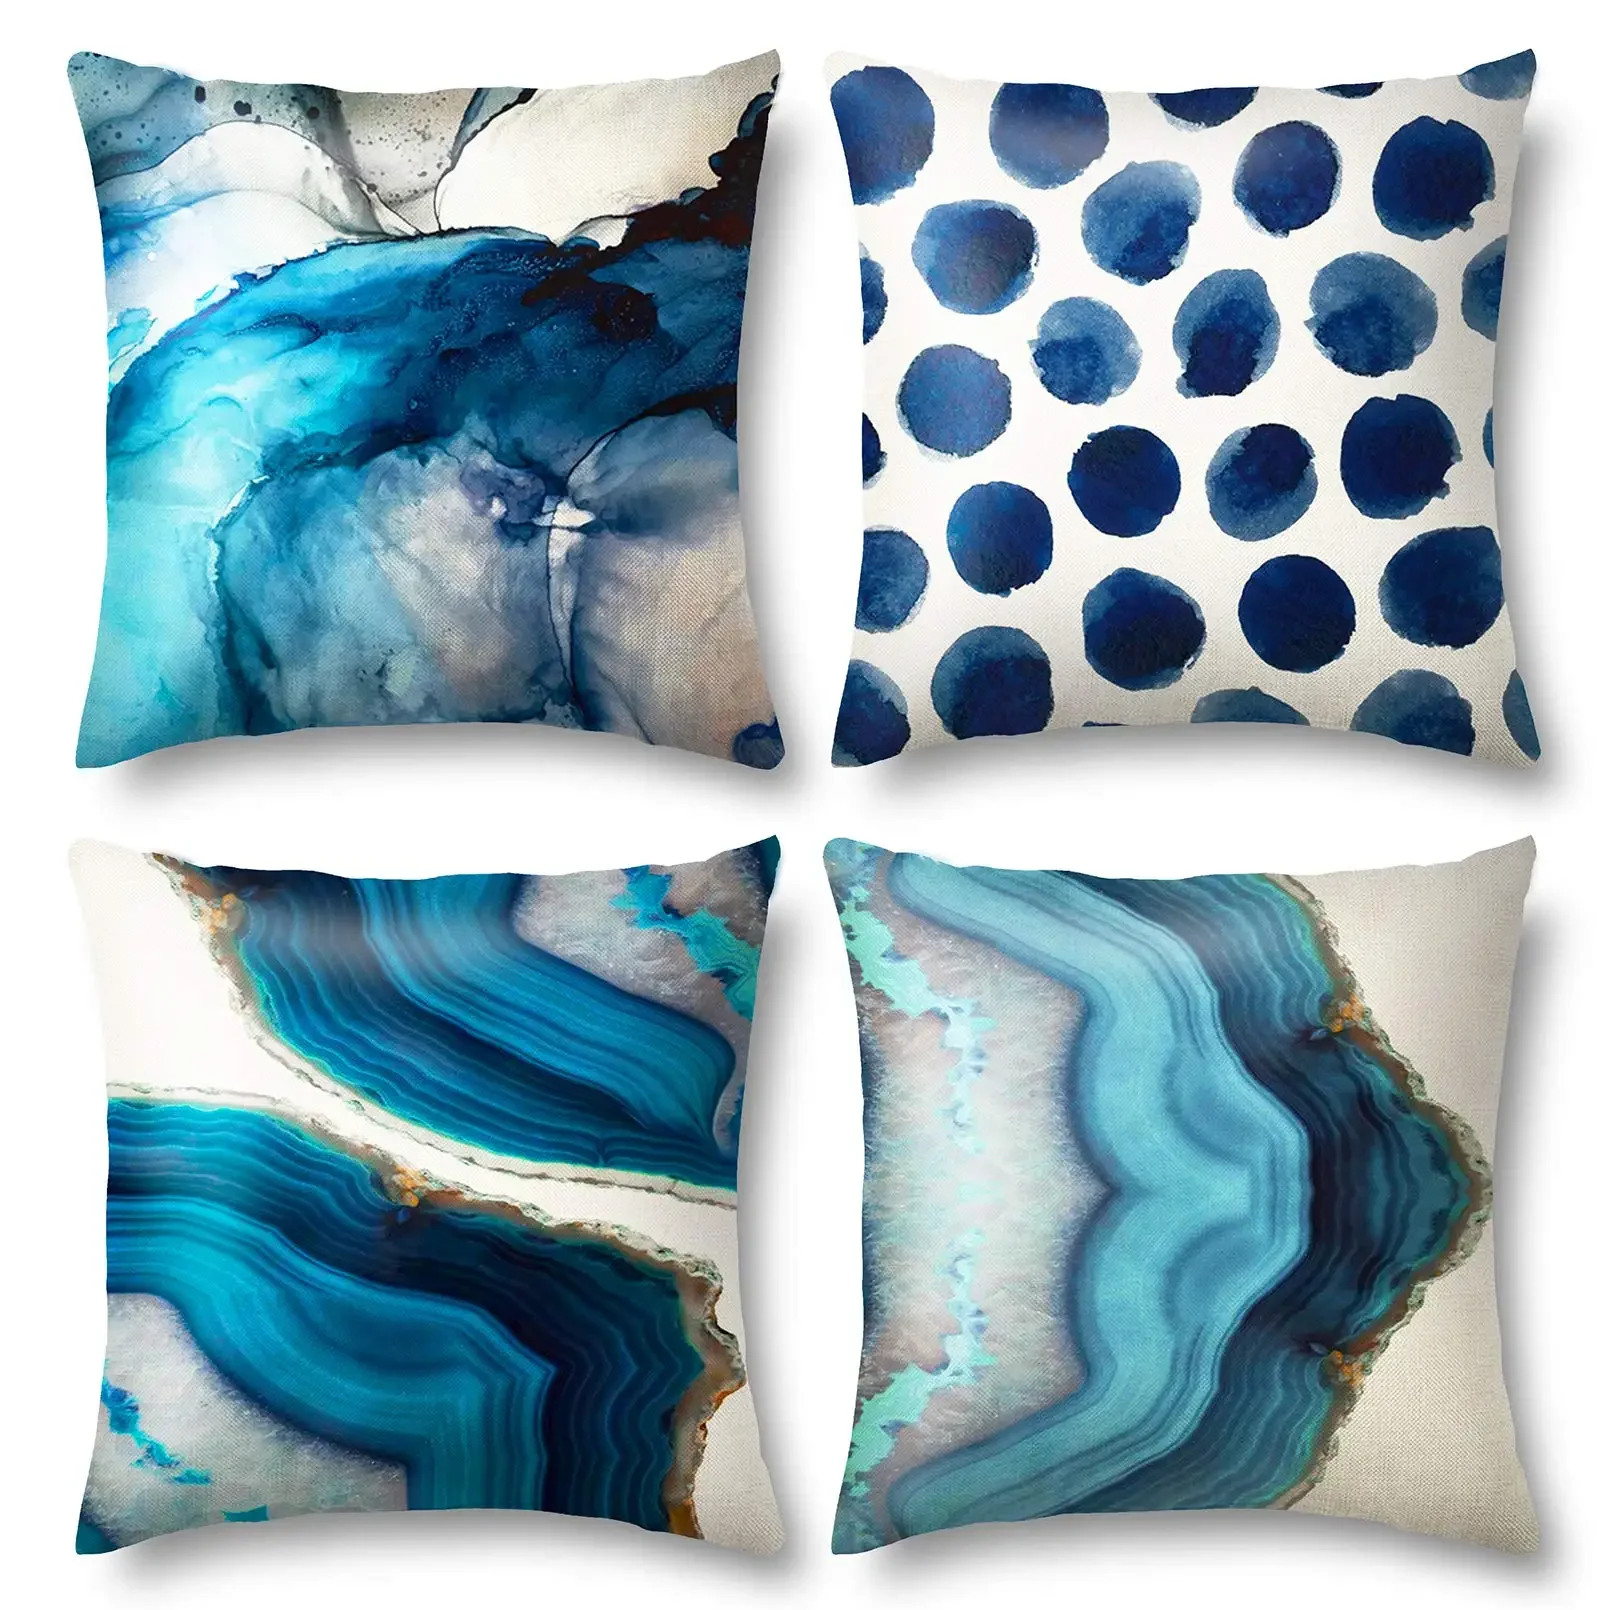 Blue ink strokes polka dot linen pillowcase sofa cushion cover home decoration can be customized for you 40x40 50x50 60x60 45x45